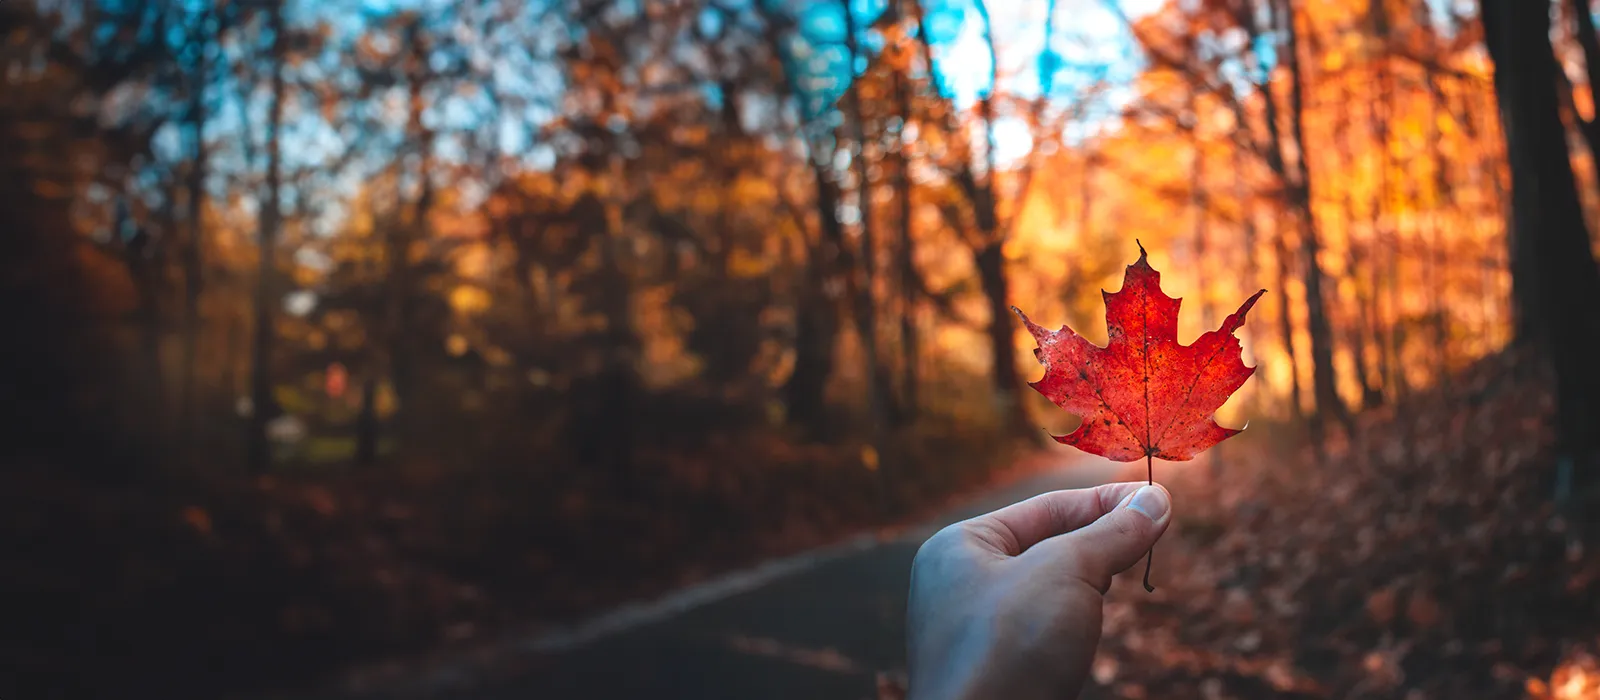 A person holding a red maple leaf against a backdrop of a lush forest.